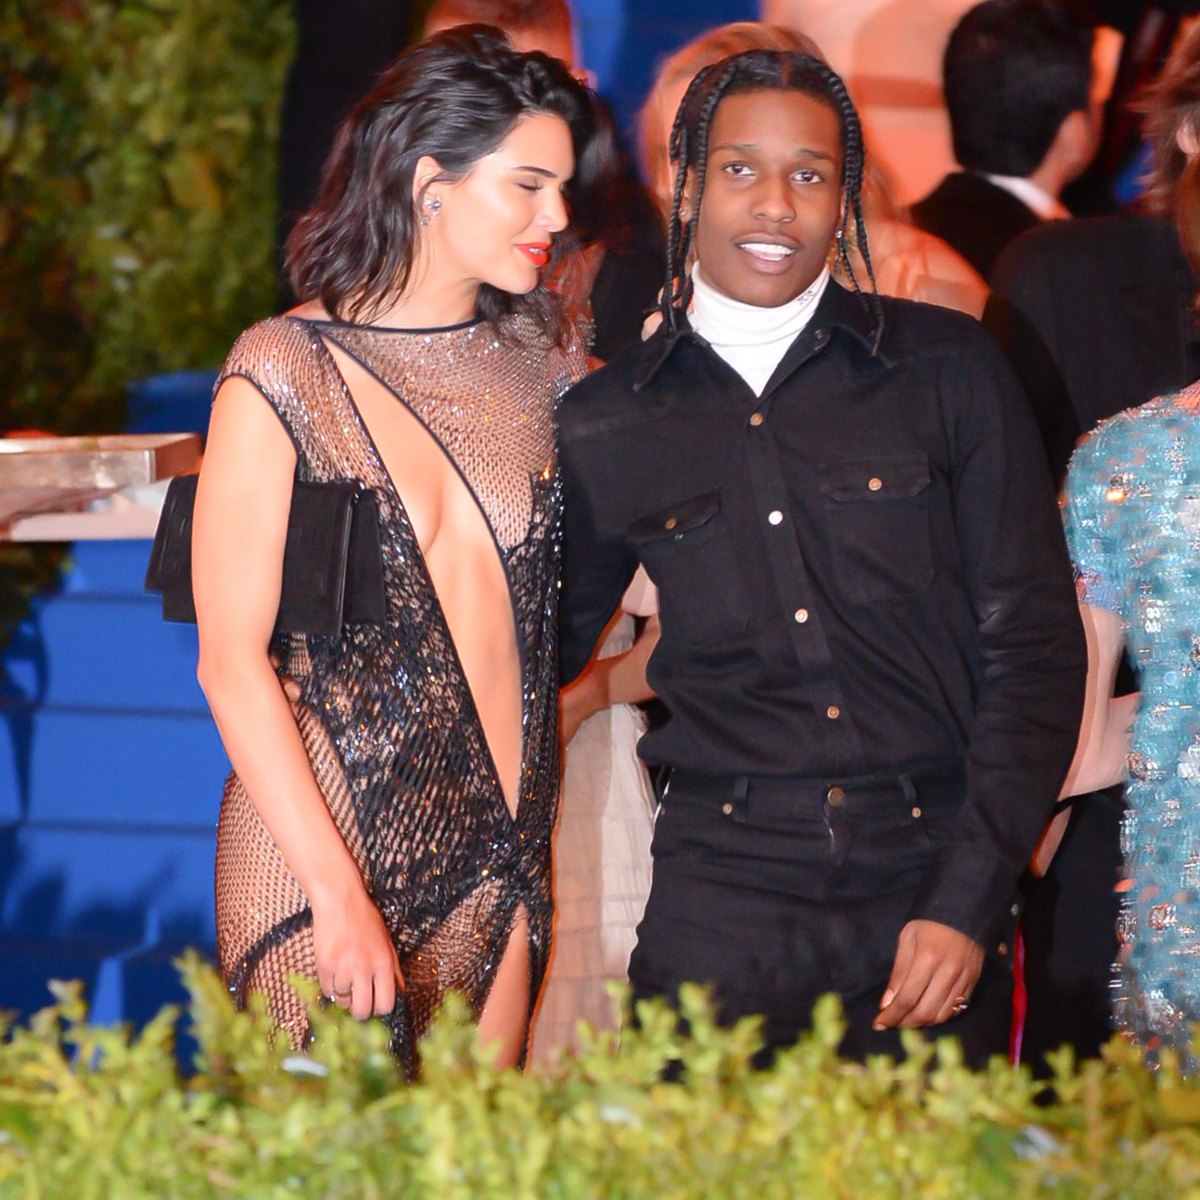 Kendall Jenner & A$AP Rocky Confirm Their Romance At Met Gala With PDA  Snaps